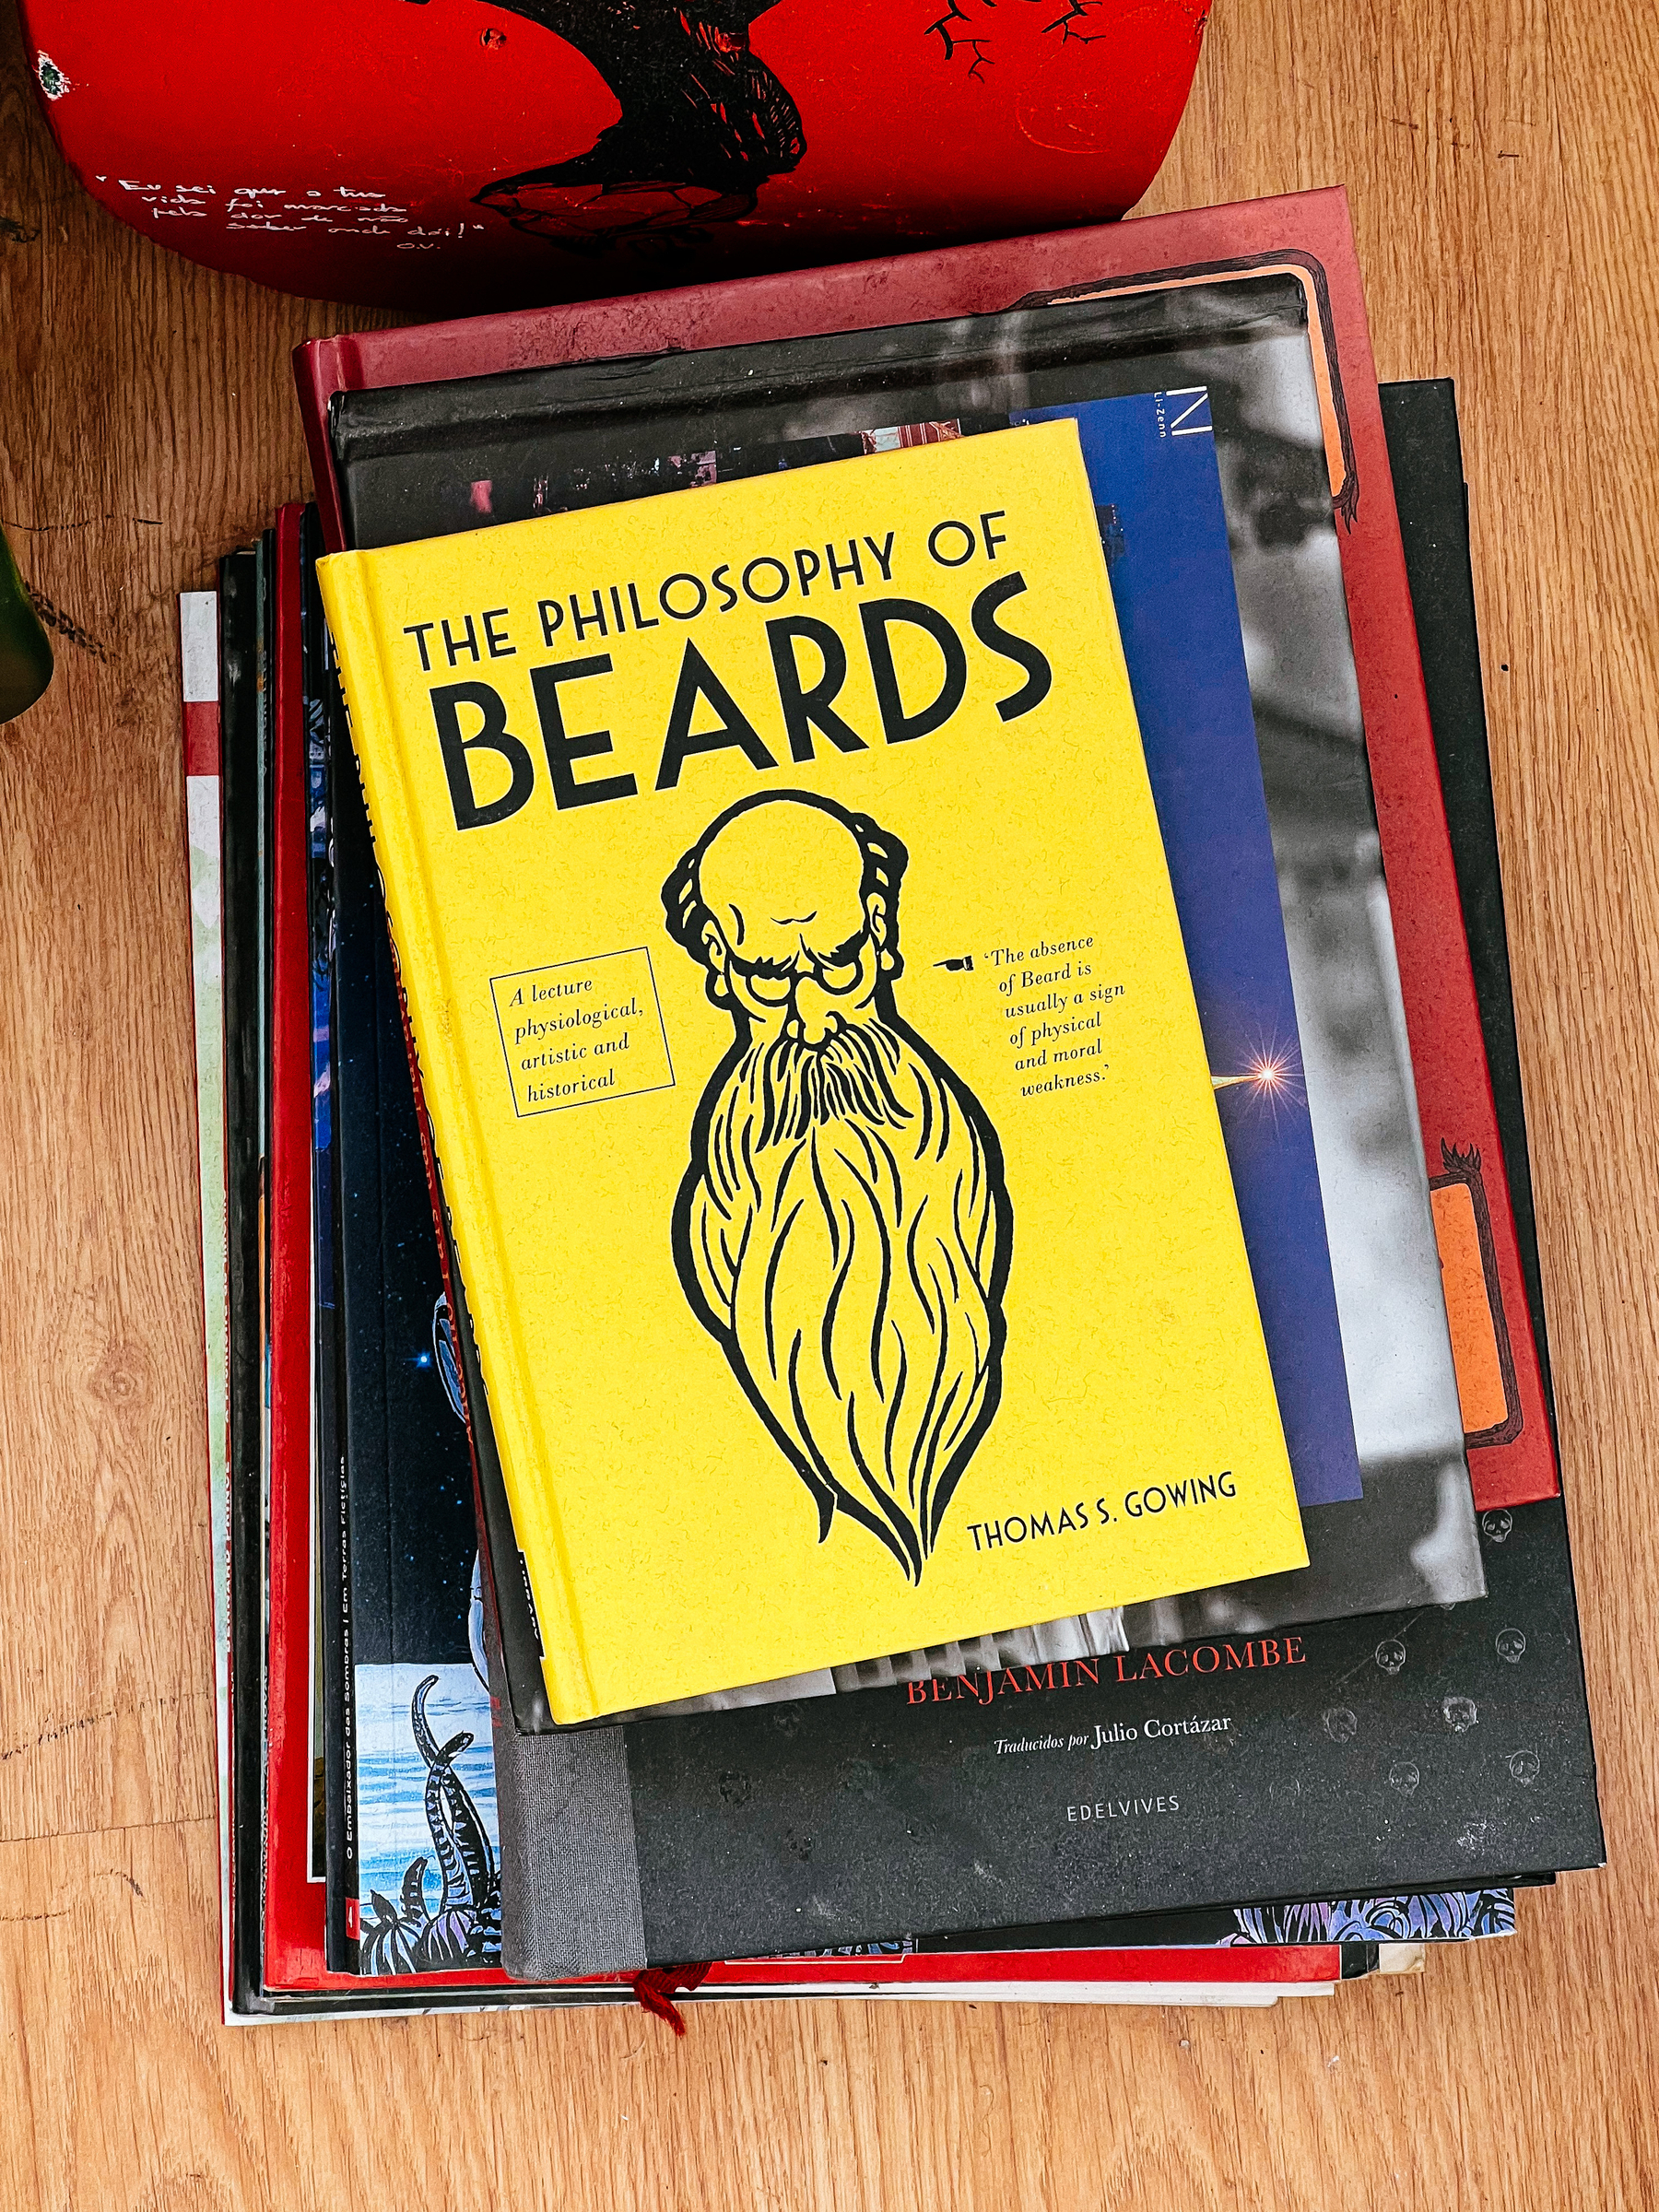 Looking down on a pile of books, with the cover of “The Philosophy of Beards” on top. 